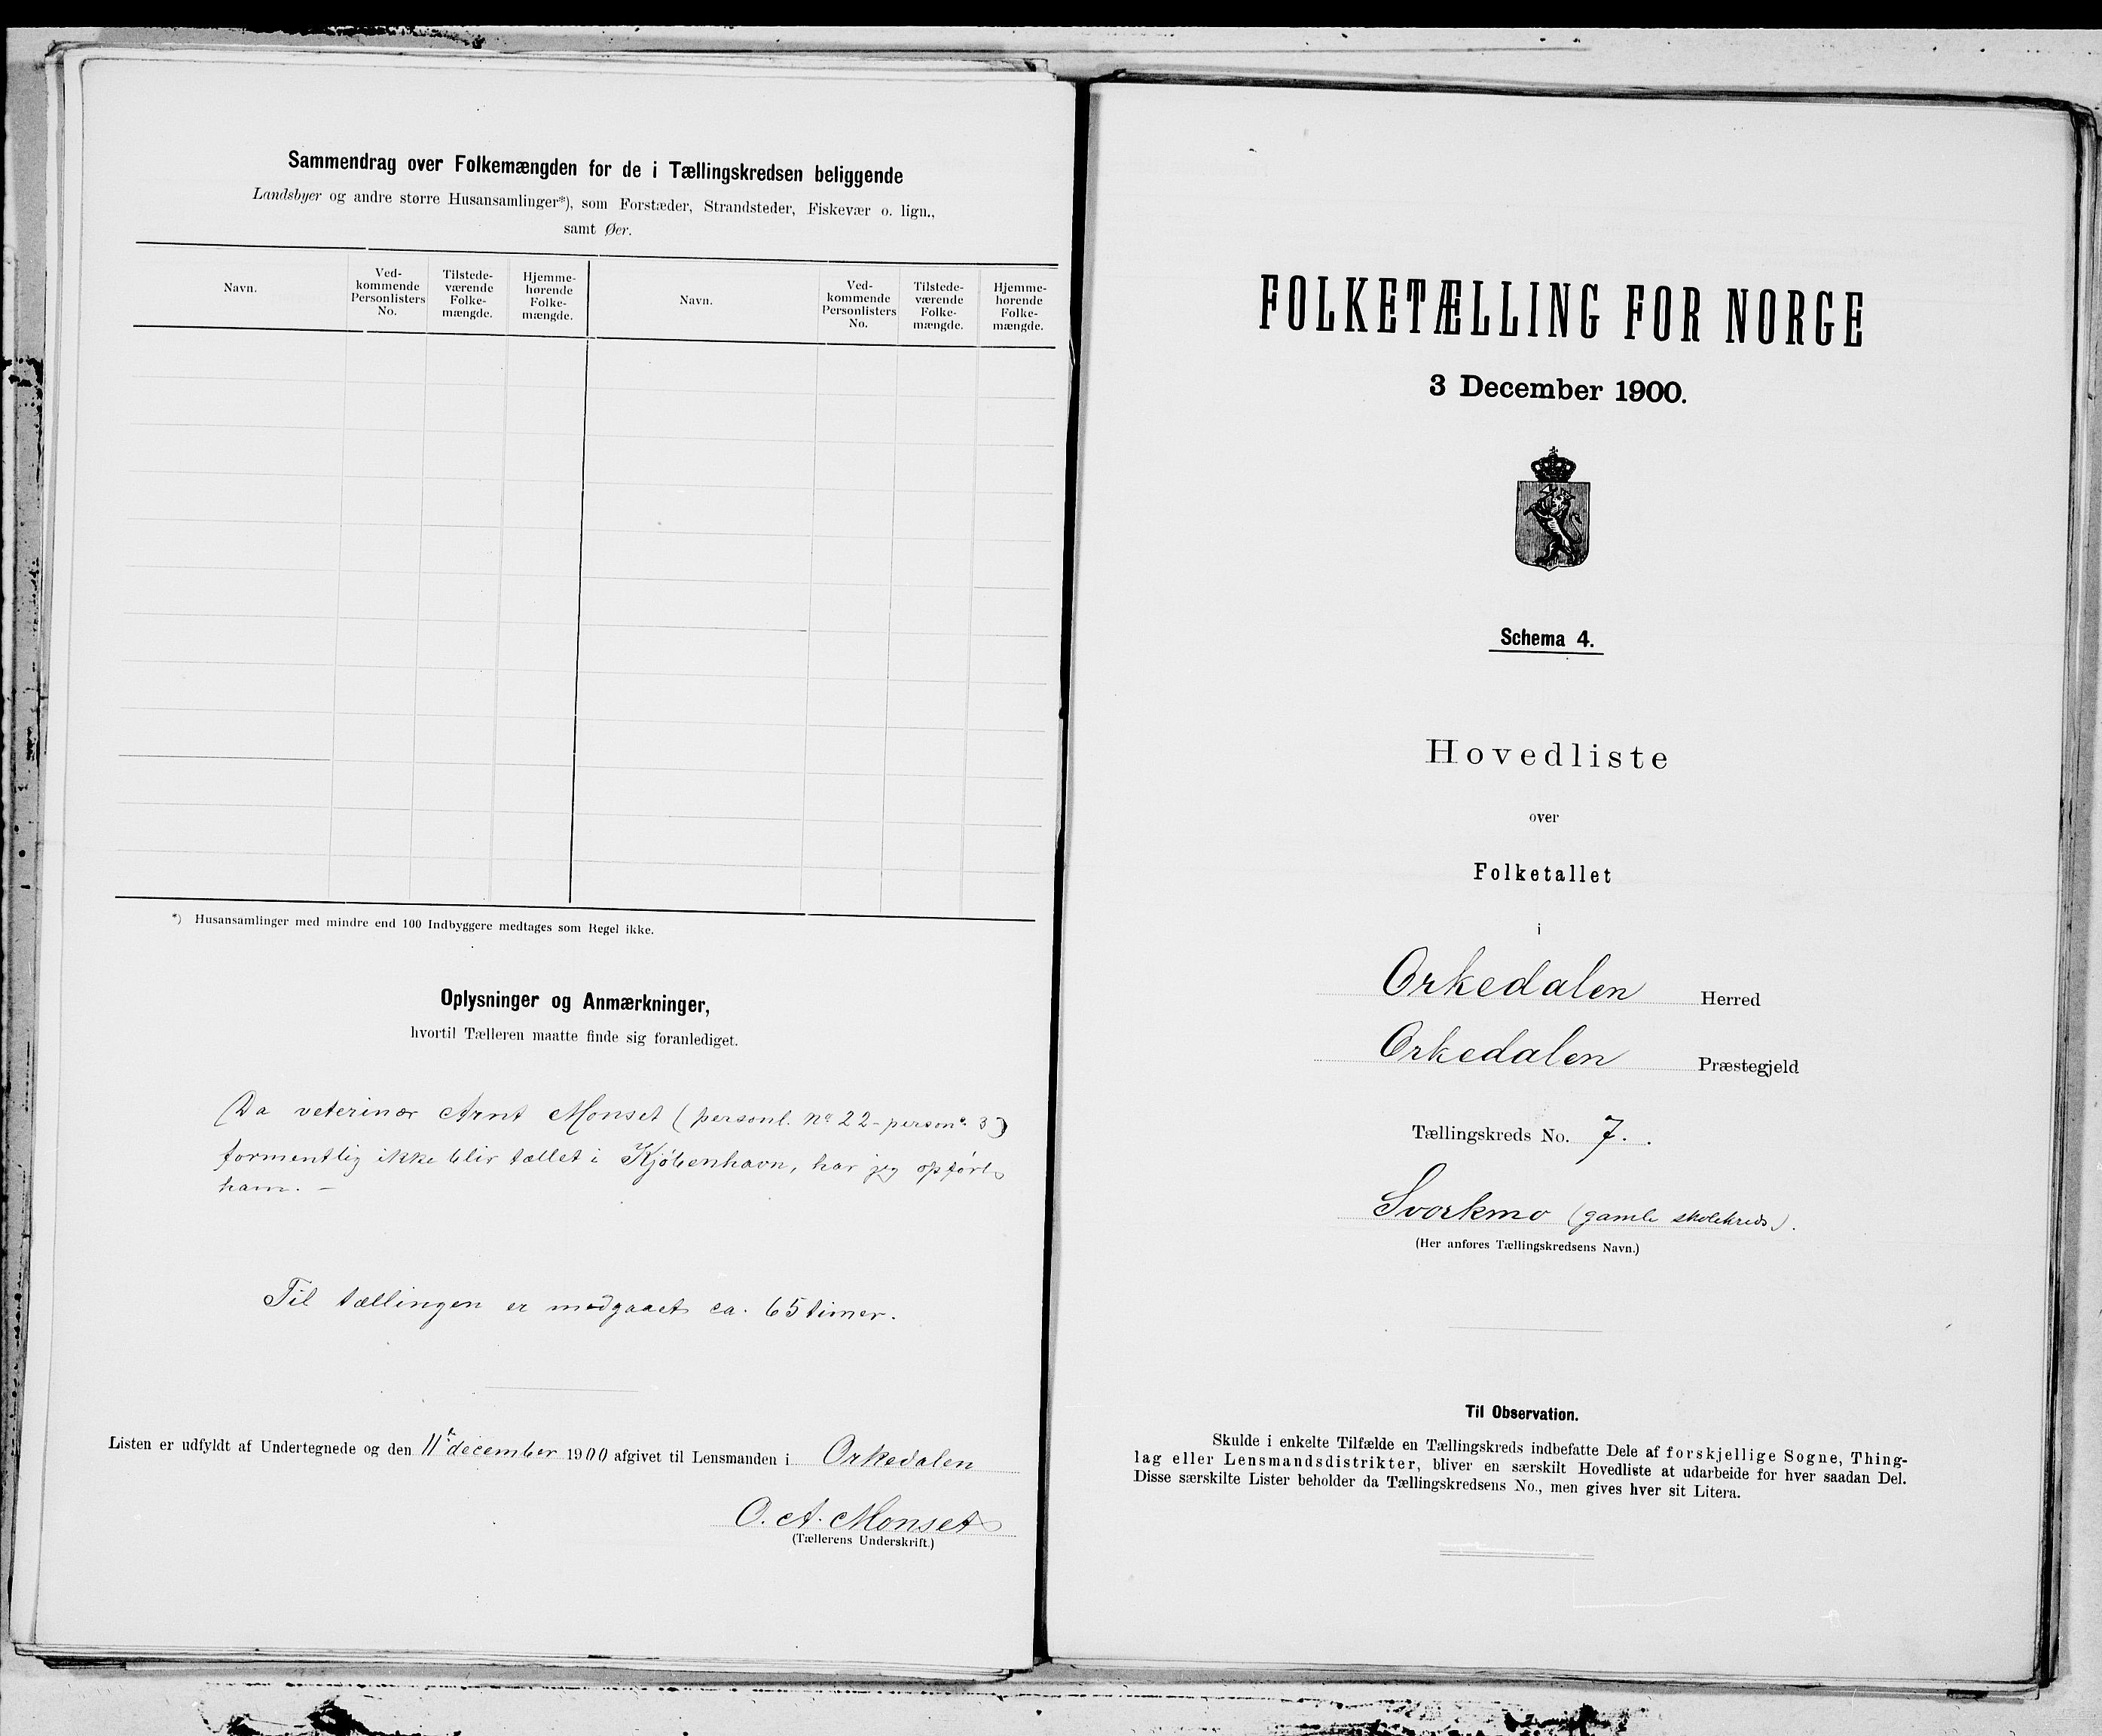 SAT, 1900 census for Orkdal, 1900, p. 16